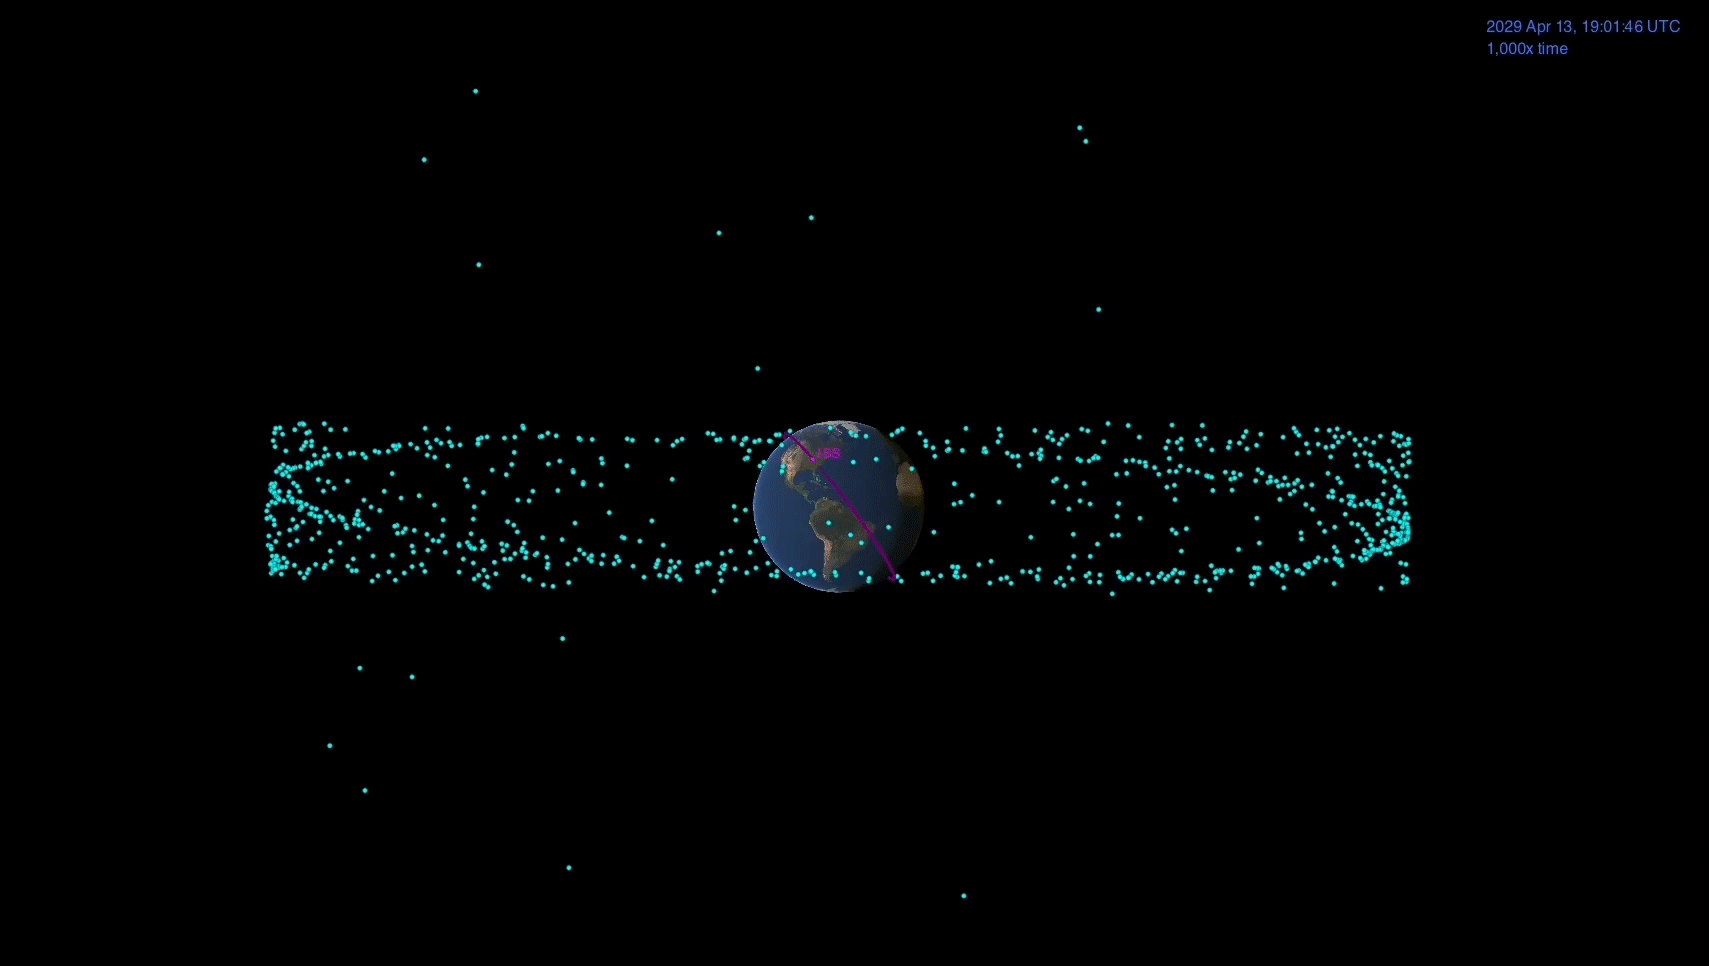 Animated rendering of the Apophis asteroid flying past Earth